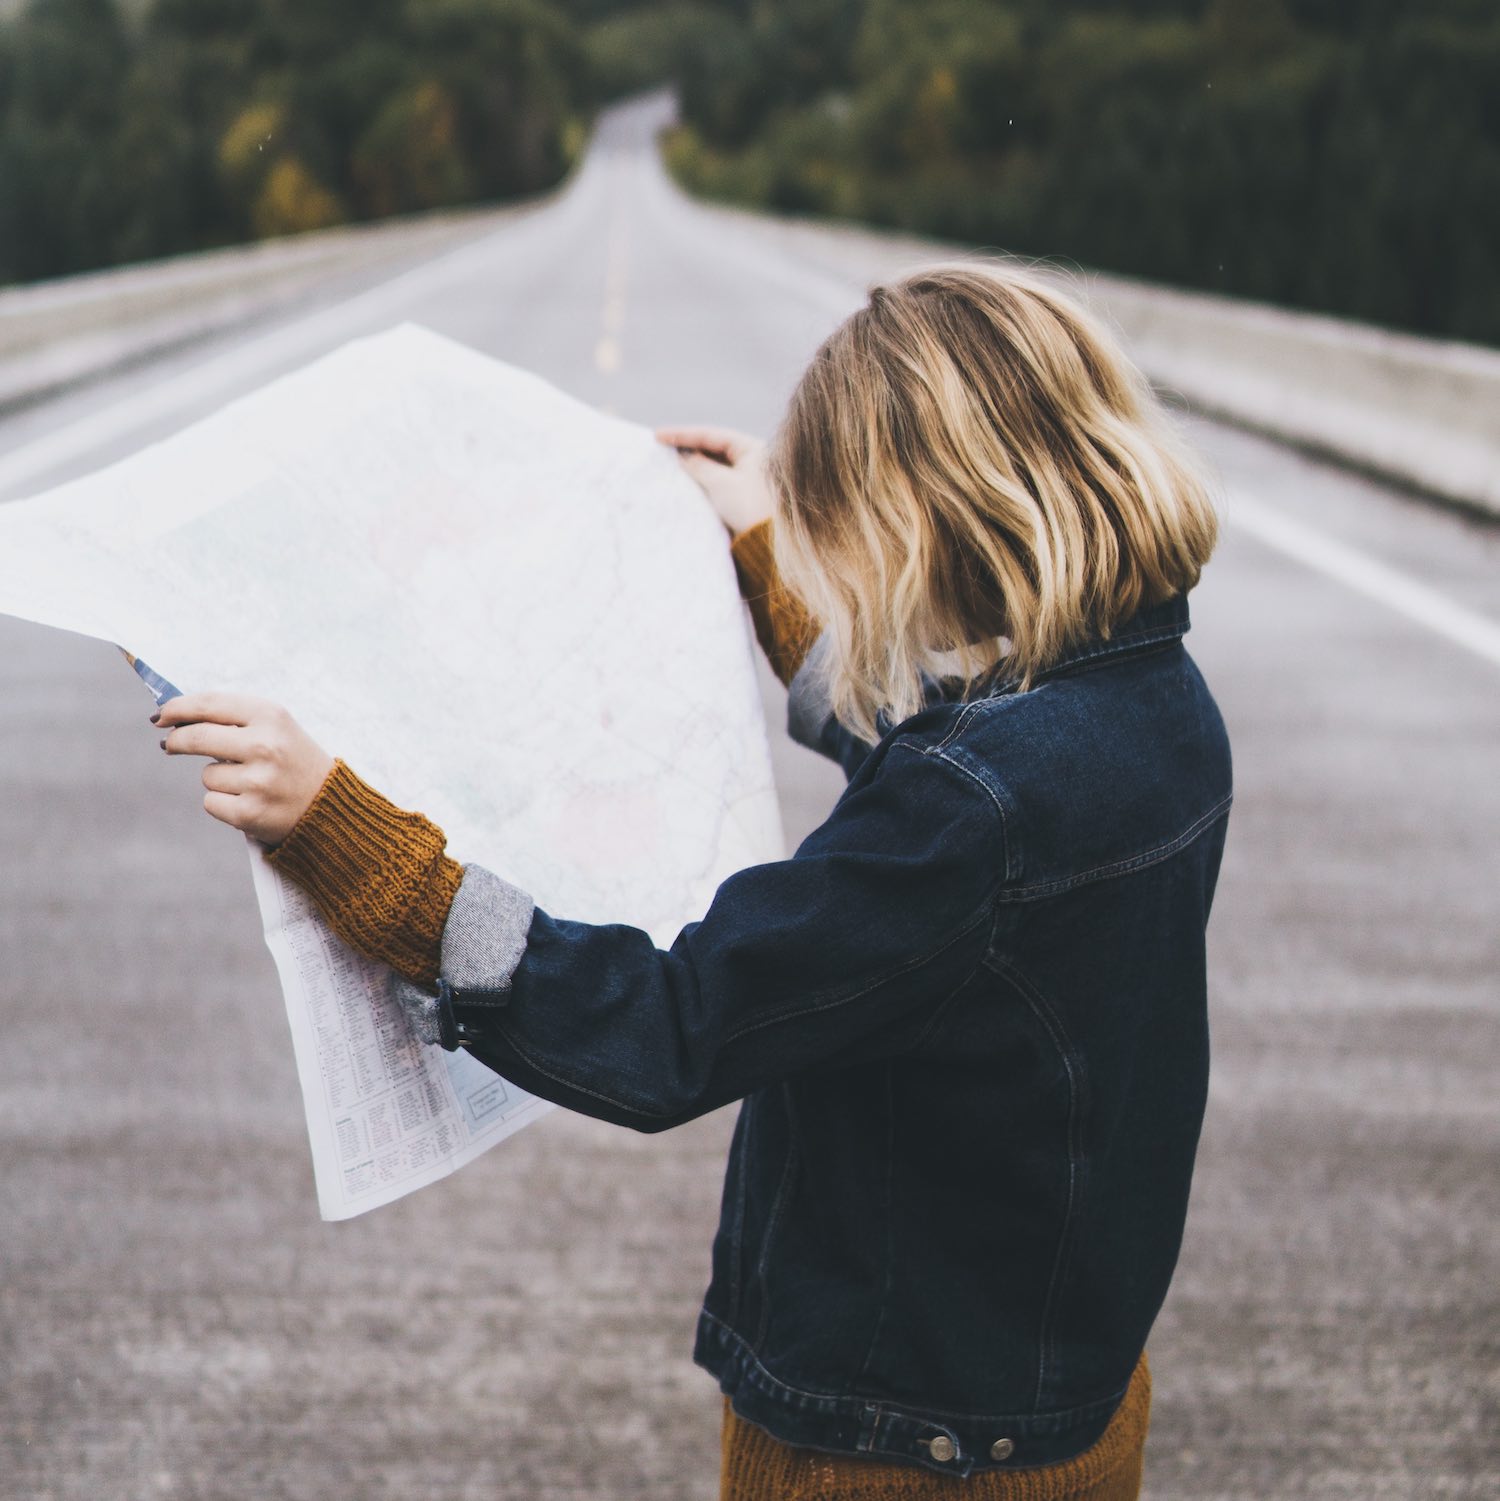 Blonde woman stands in the center of an interstate highway while examining an unfolded map.